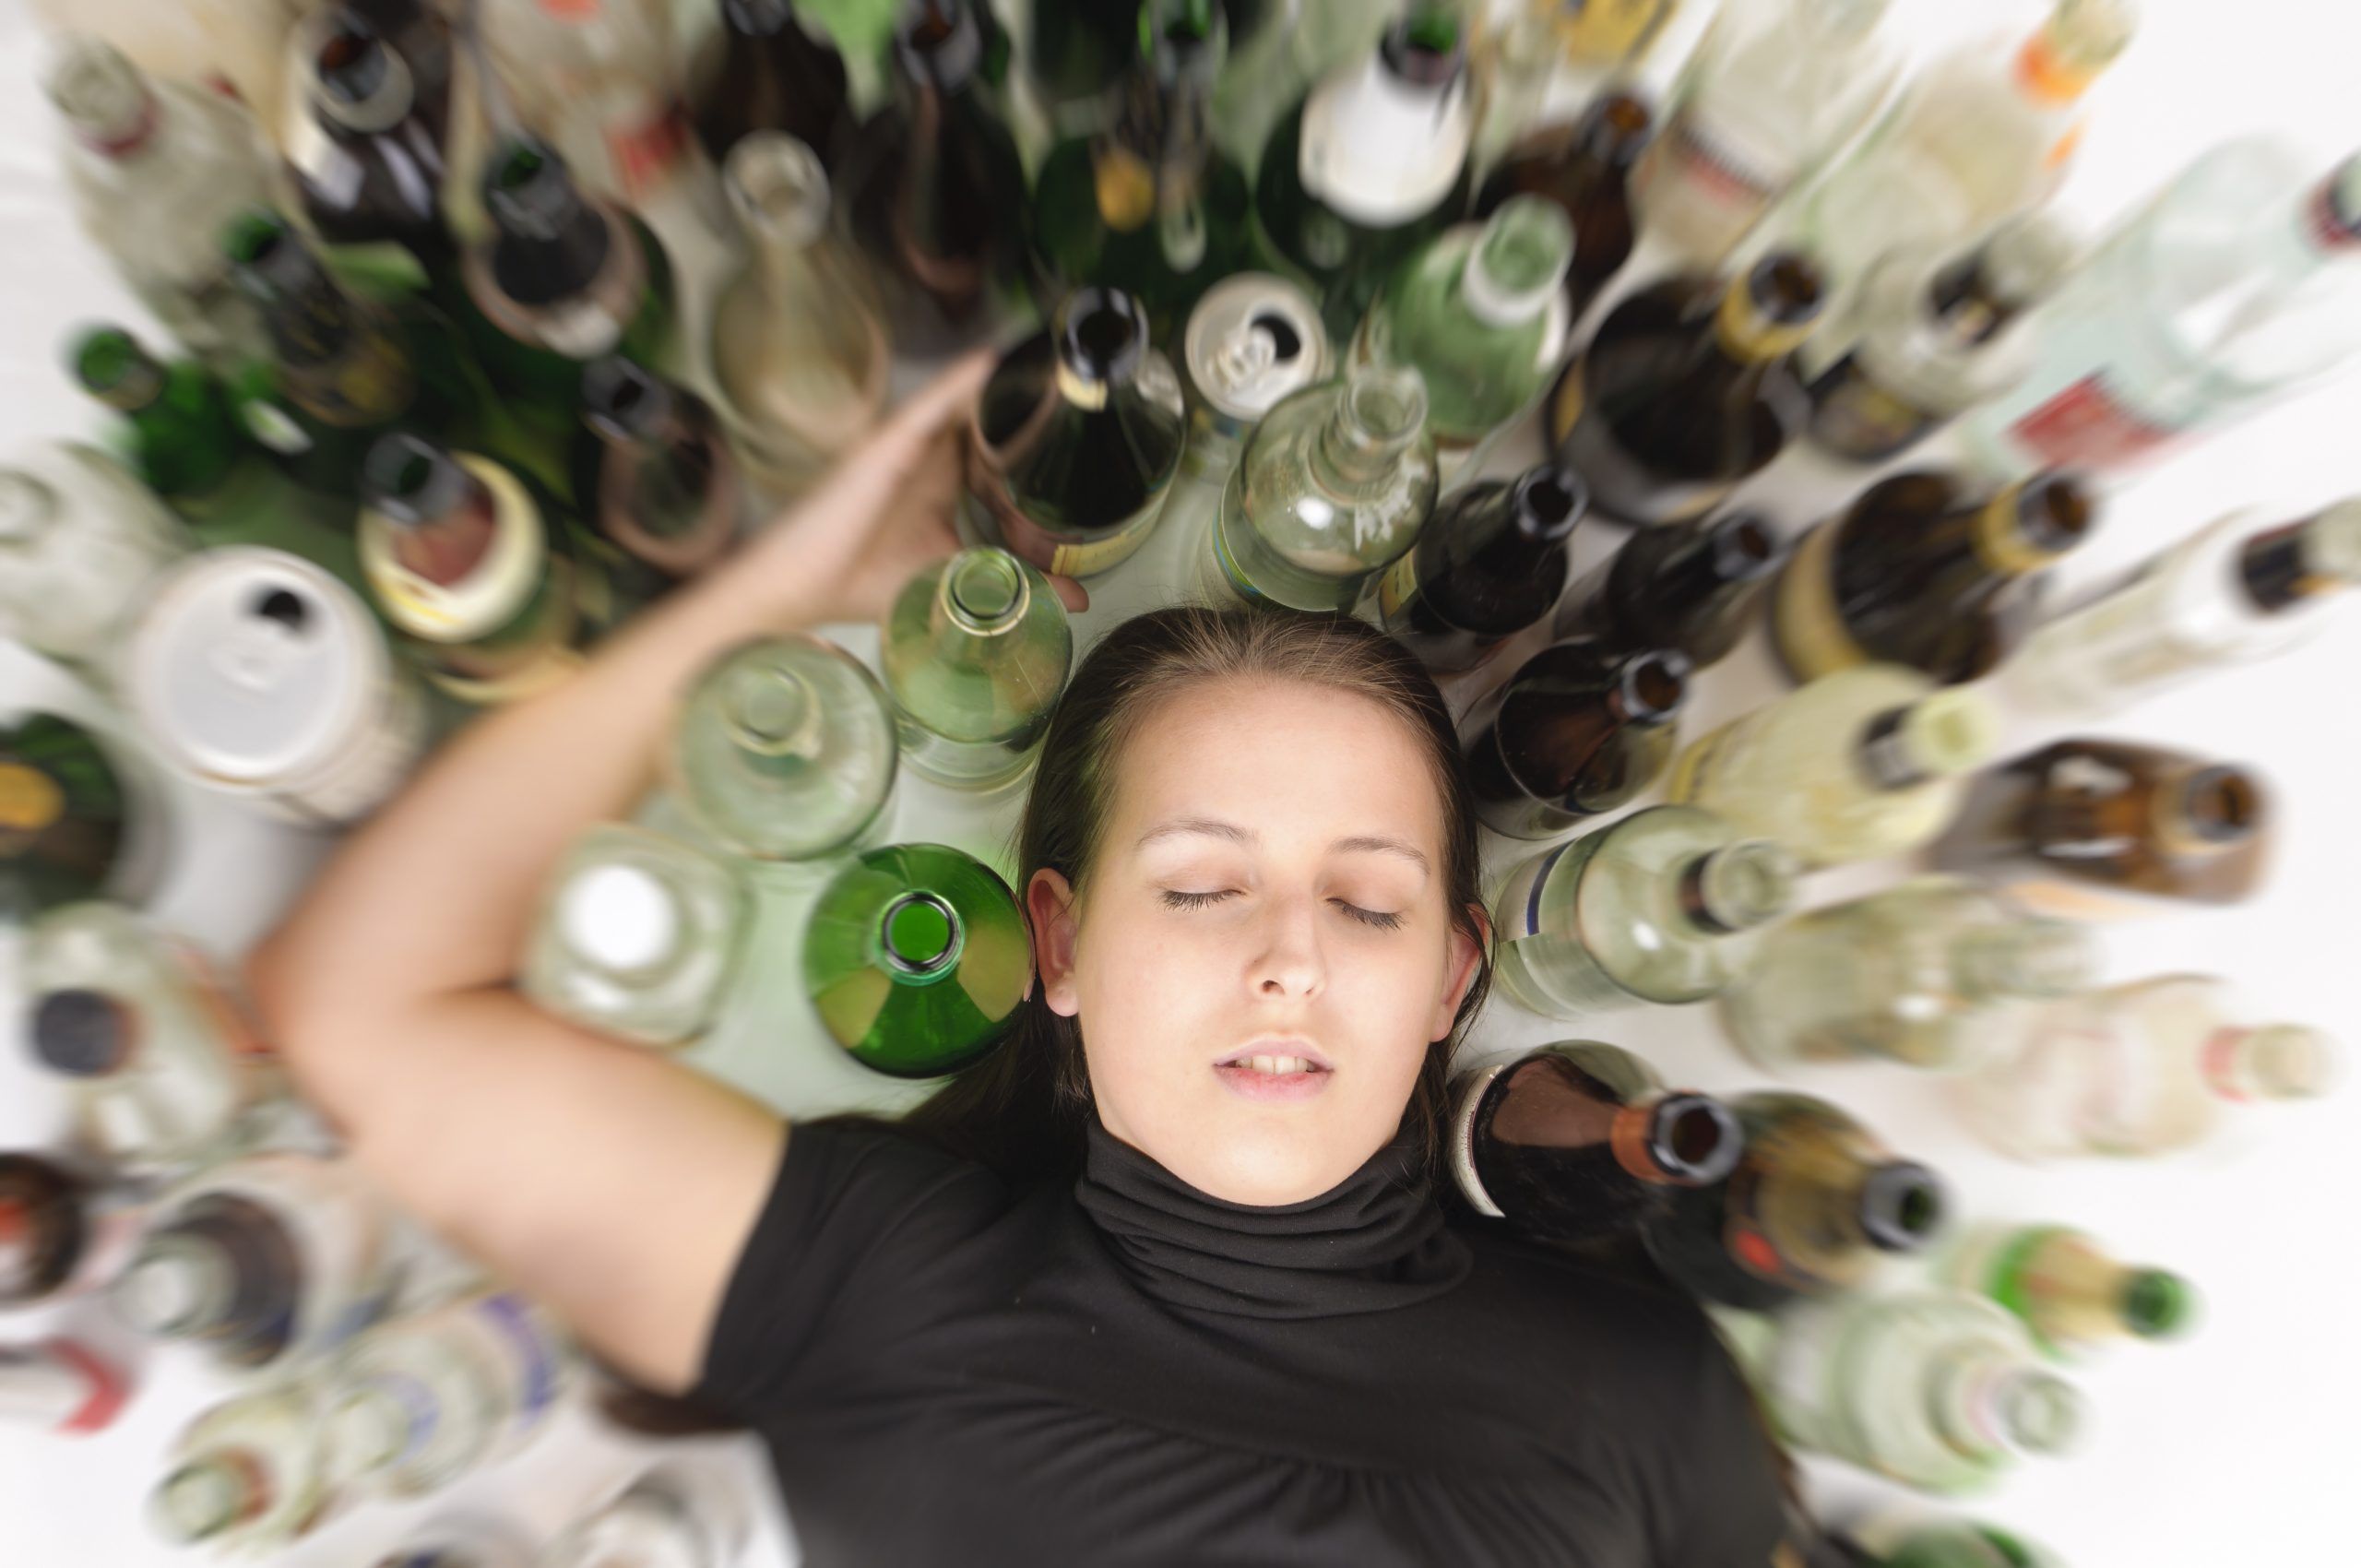 College Aged Women Binge Drinking More Than Men For First Time 